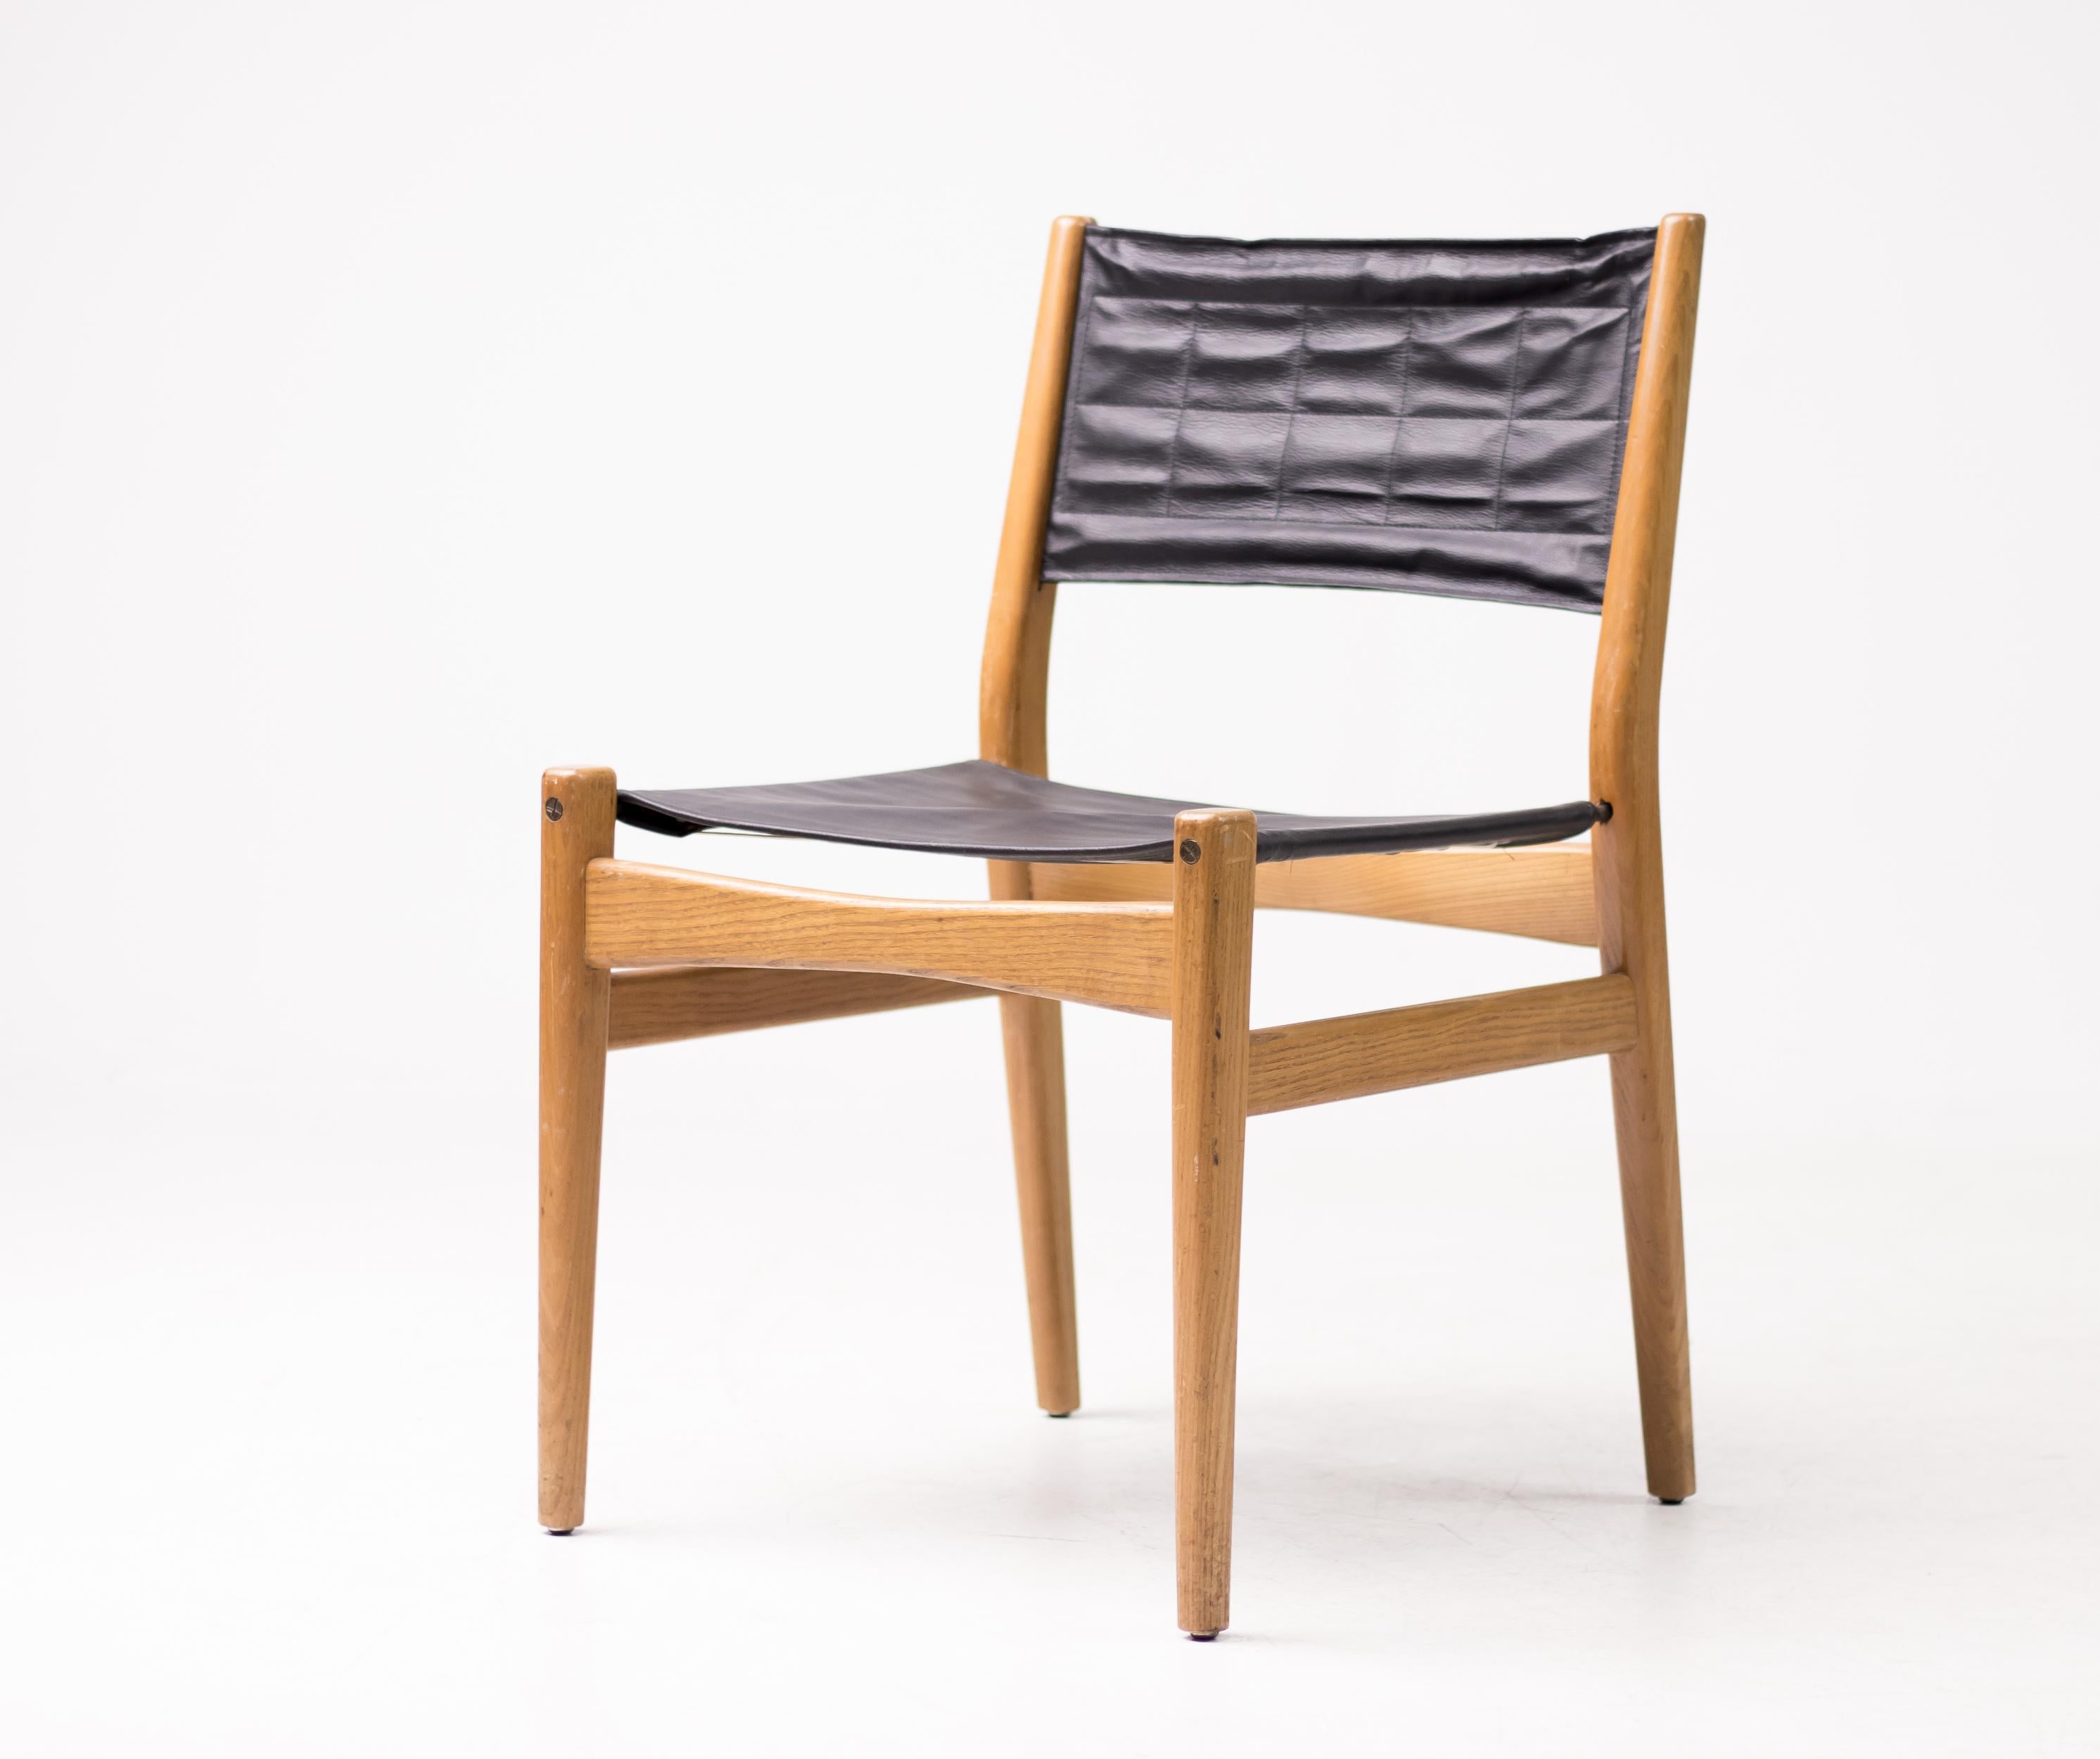 Ingenius set of 4 Minimalist Danish dining chairs in teak with a dark brown leather seat and back.
Sleek, light and very comfortable due to the sling design.
Great vintage condition.